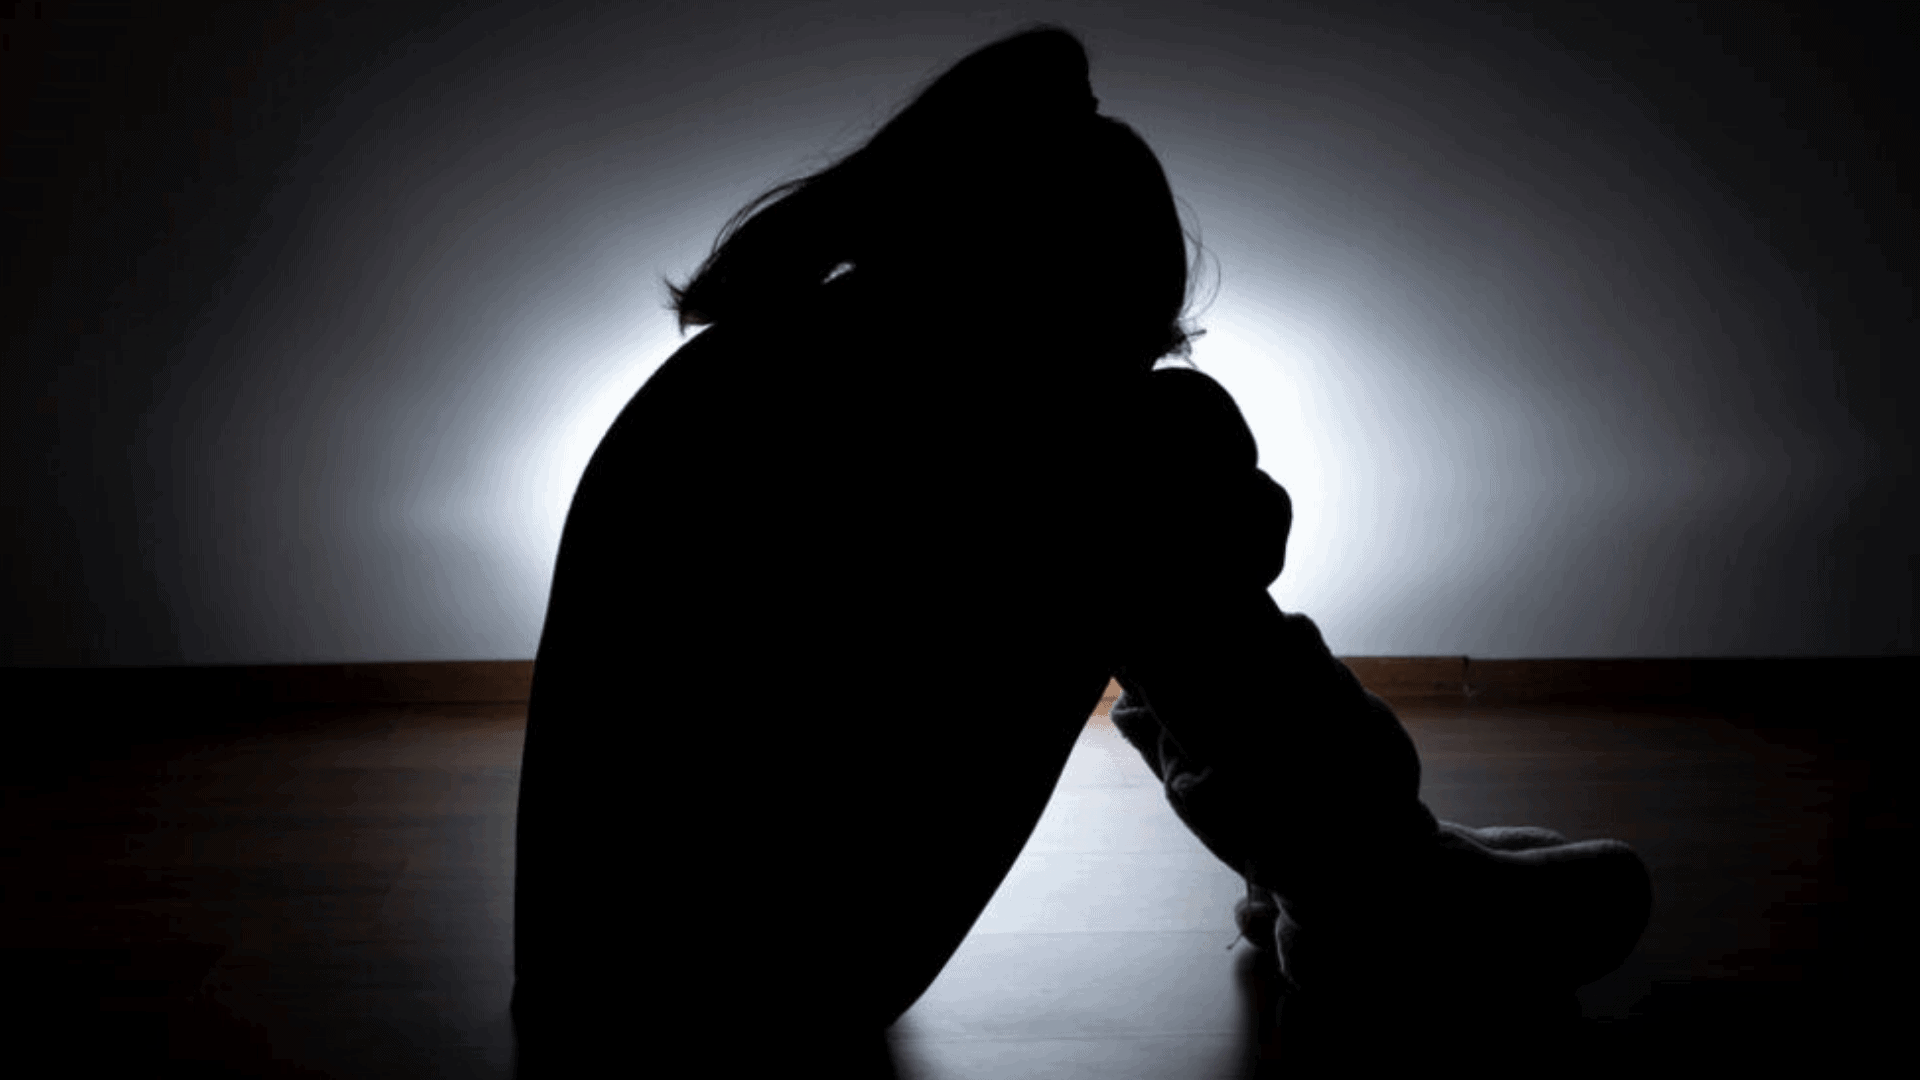 Adolescents-Should-Be-Screened-For-Depression-In-Schools-1